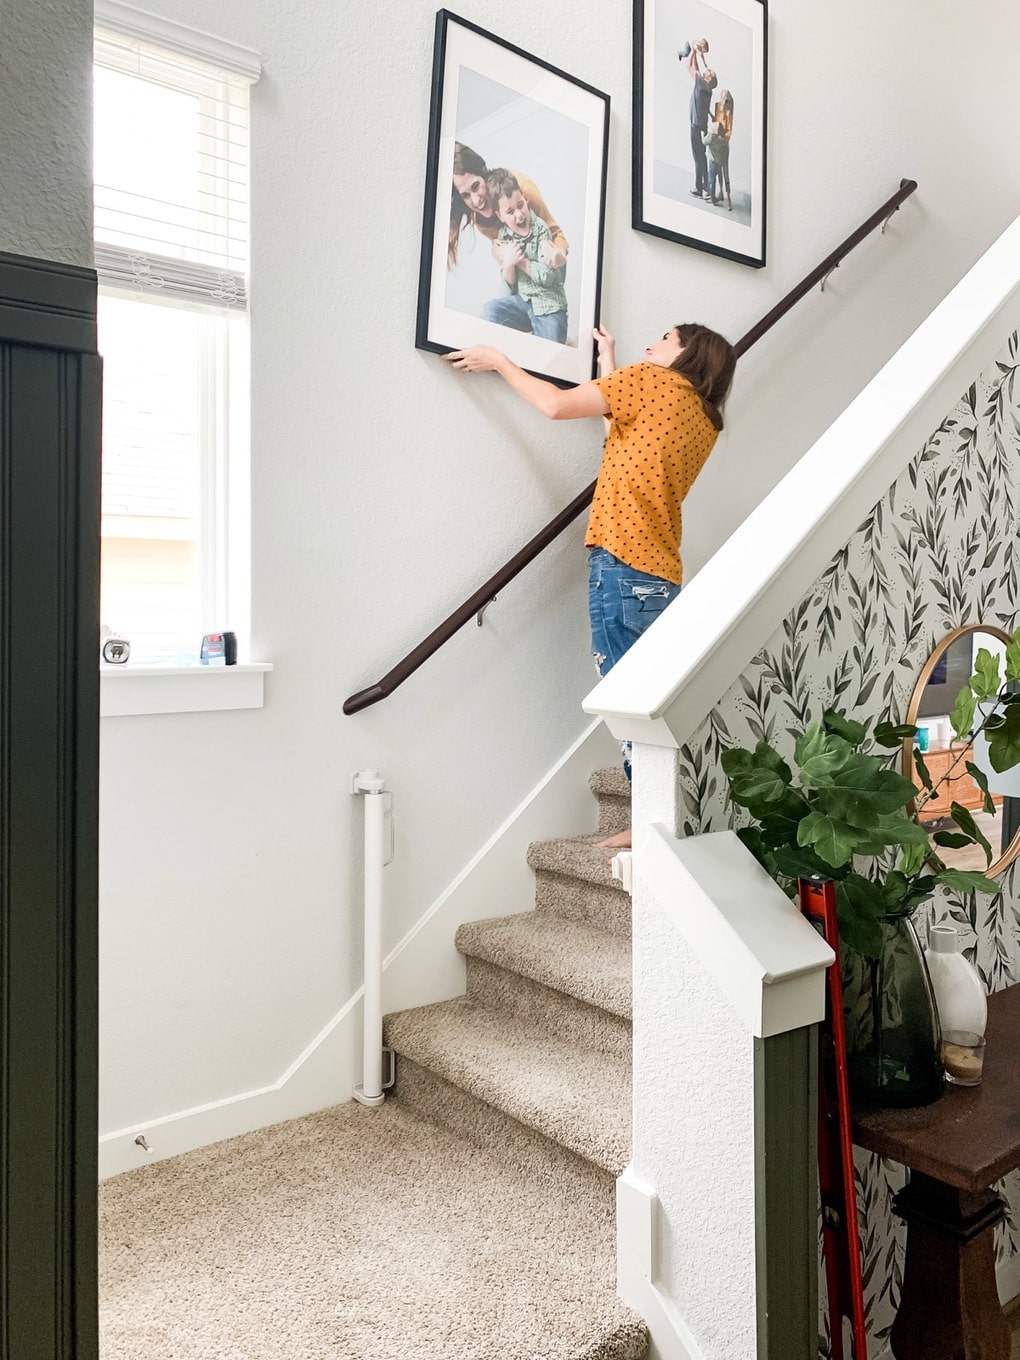 Woman hanging a large frame on her stair wall